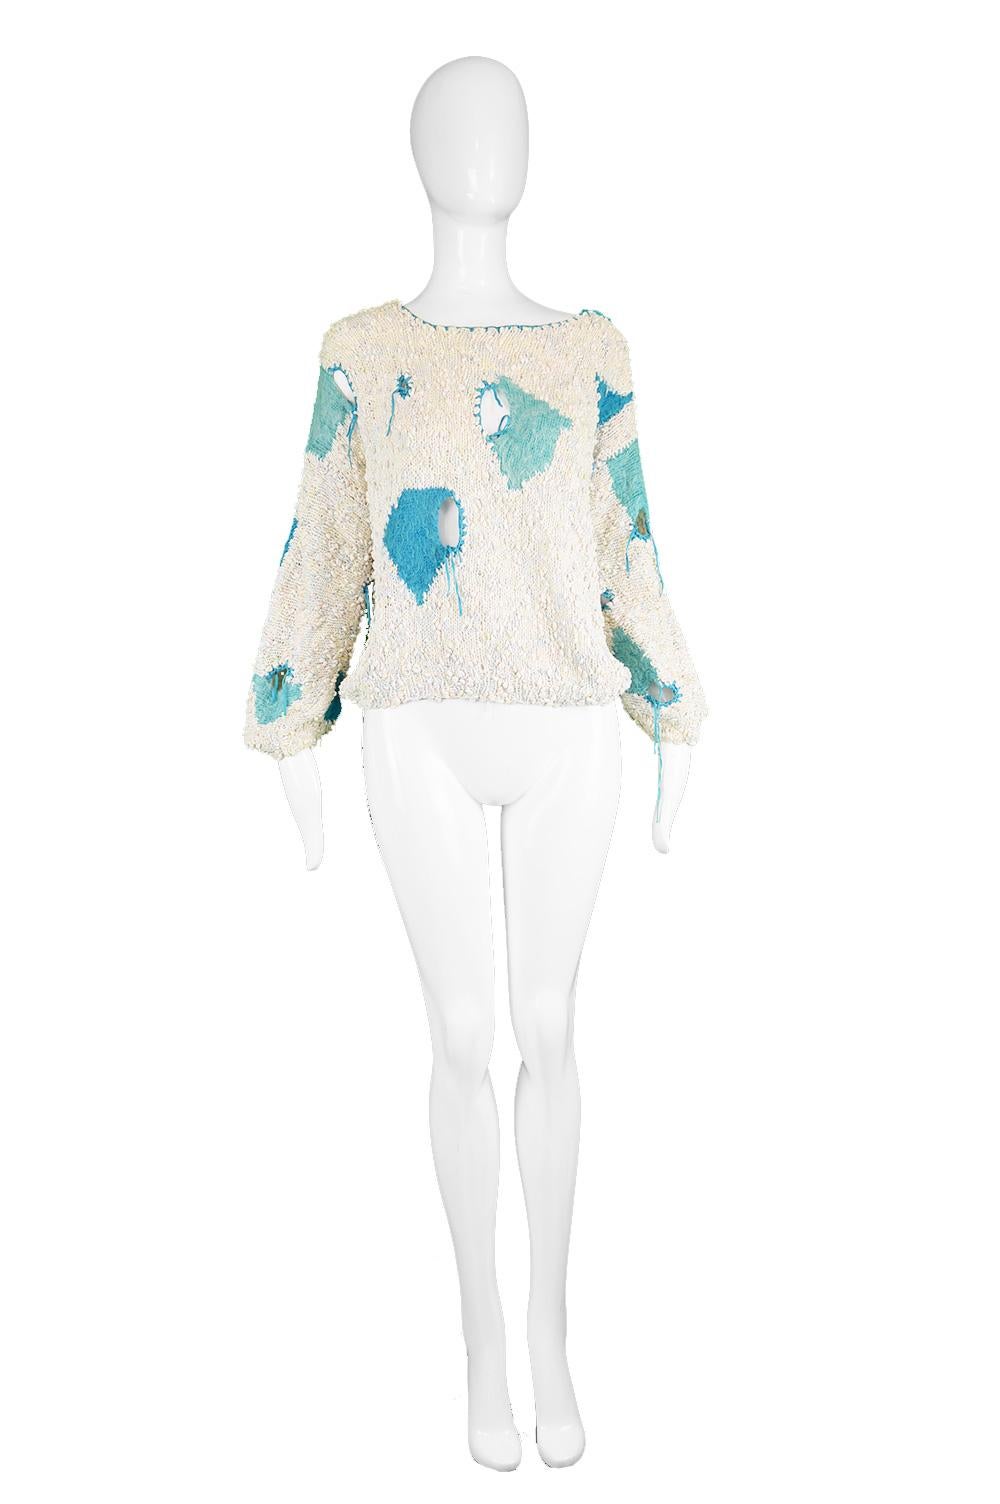 A bold and edgy vintage women's sweater from the 80s in a cream and subtle pastel colored boucle knit fabric with turquoise mohair wool knit with 'holes' finished with laces to create a deconstructed look. A true piece of wearable art, it has a